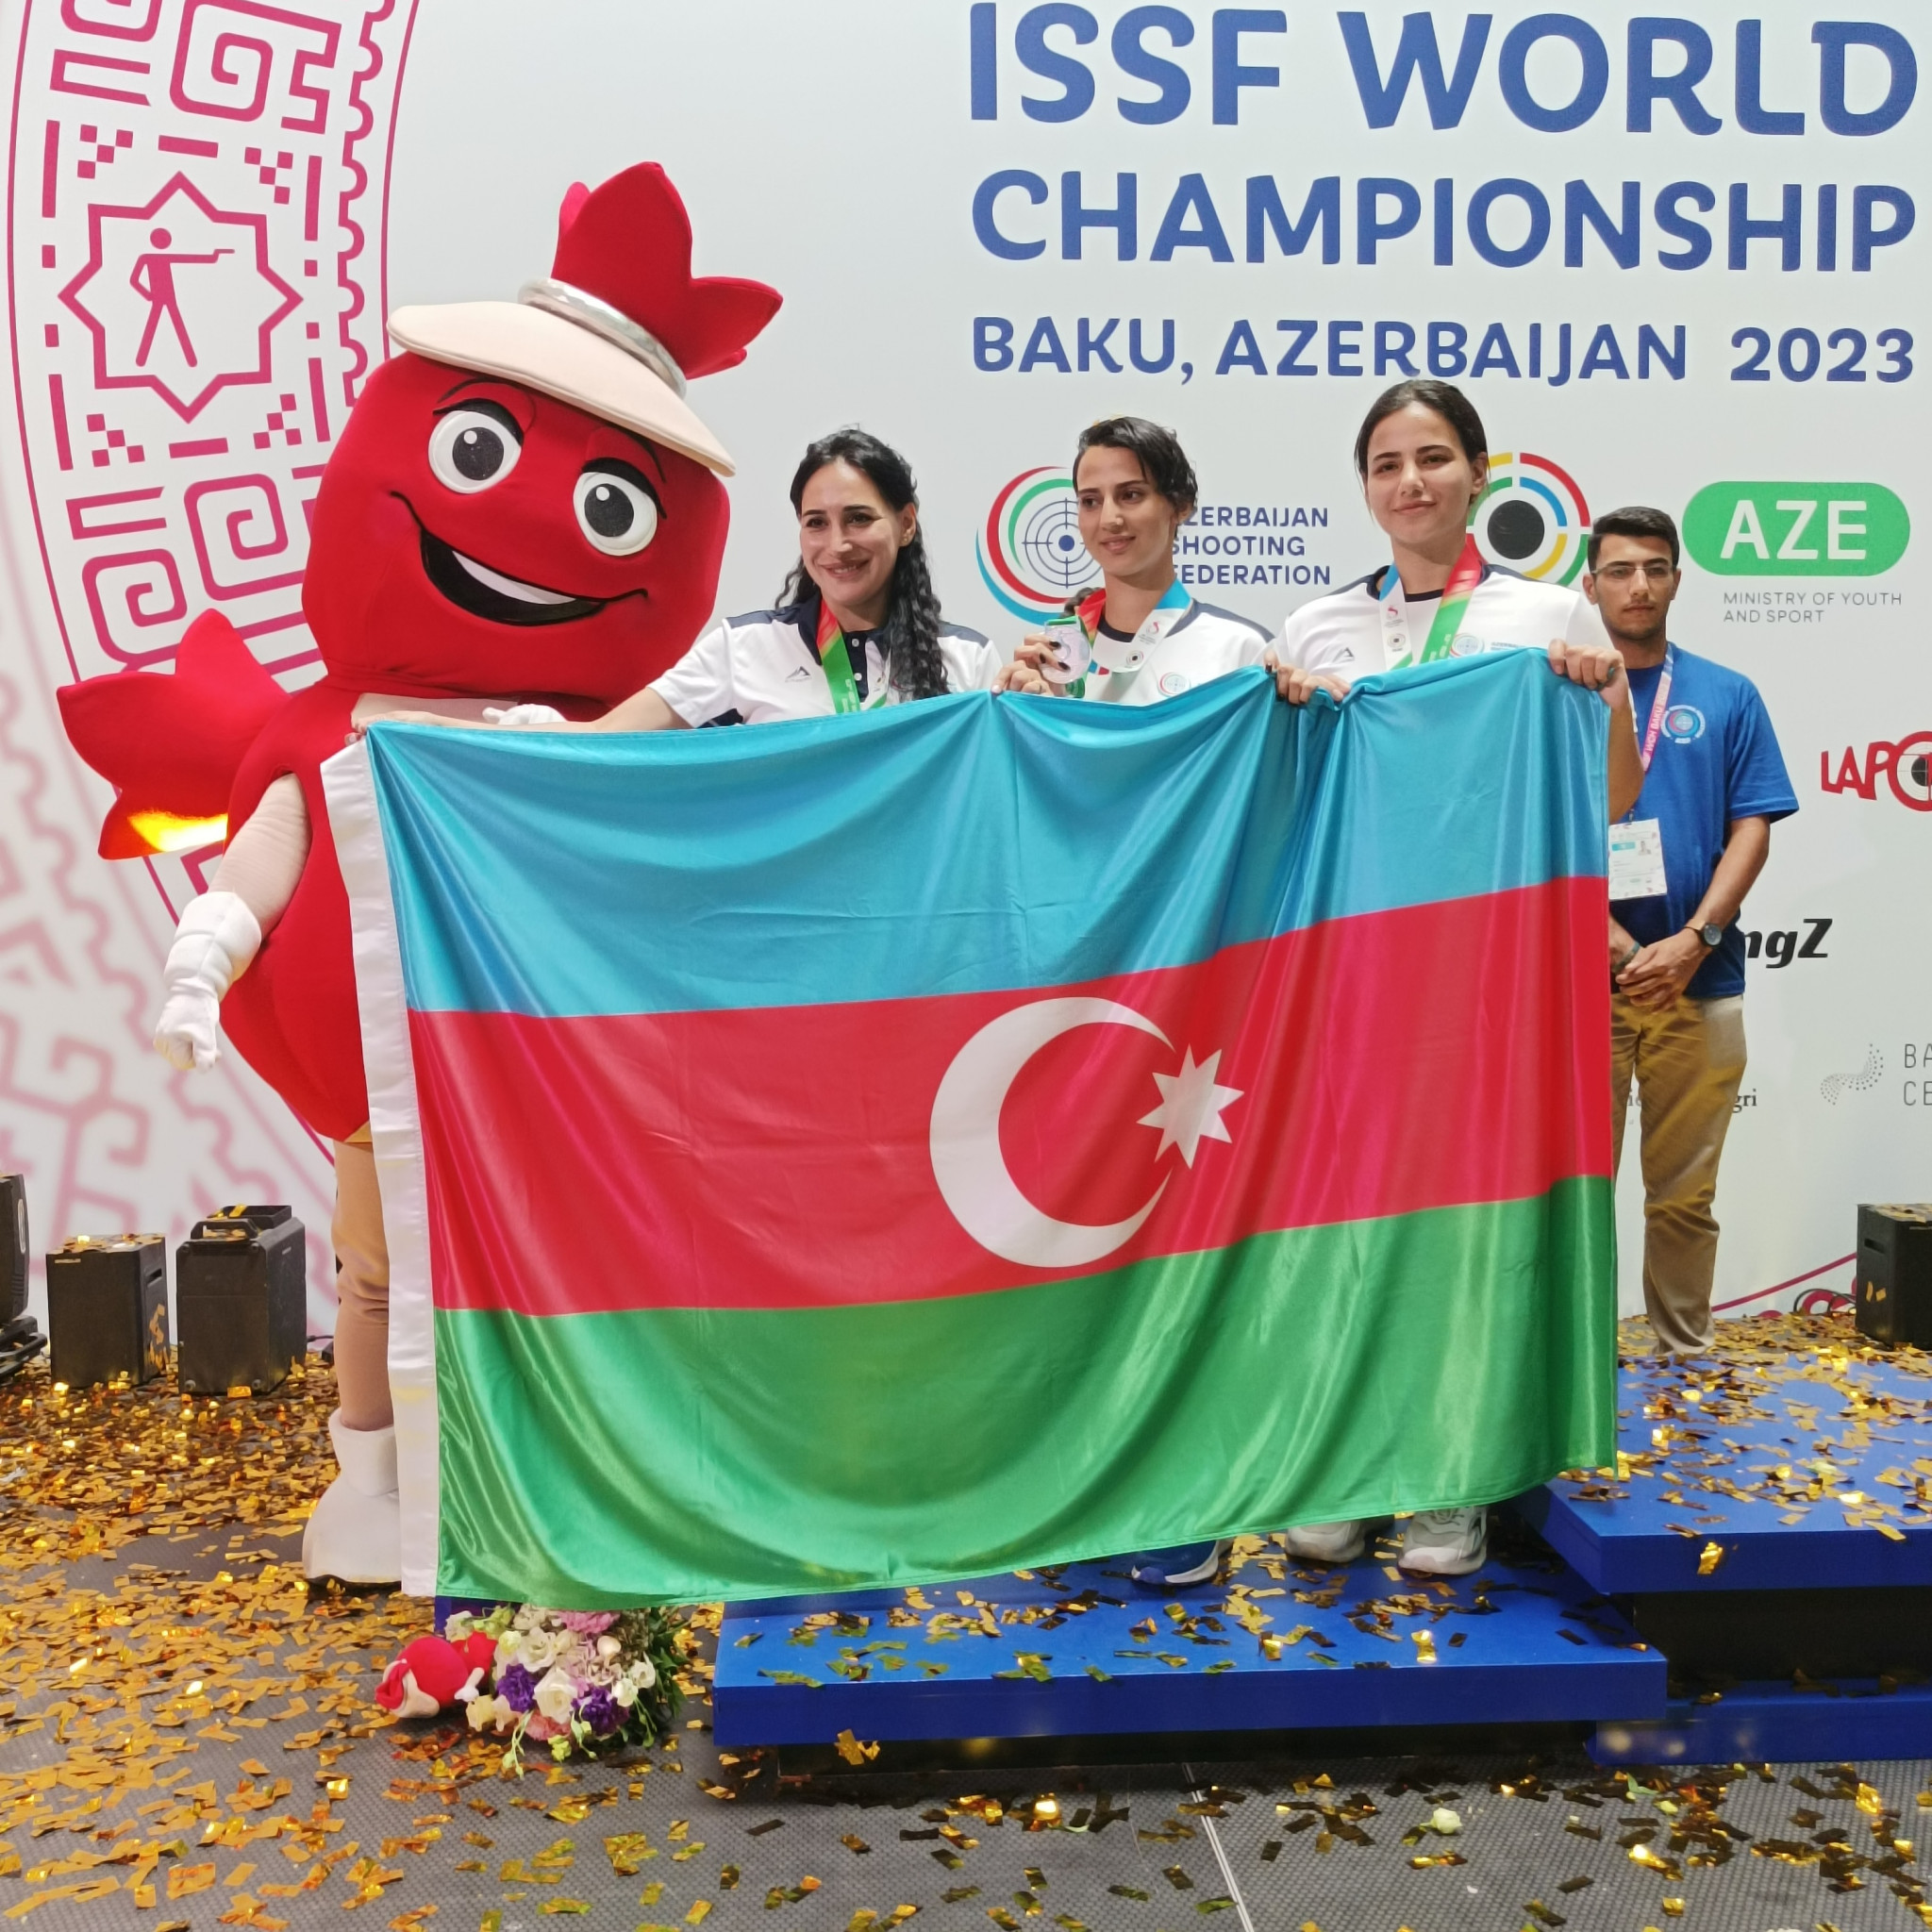 Azerbaijan won three medals at the ISSF World Shooting Championships held in Baku but not in Olympic disciplines ©ITG